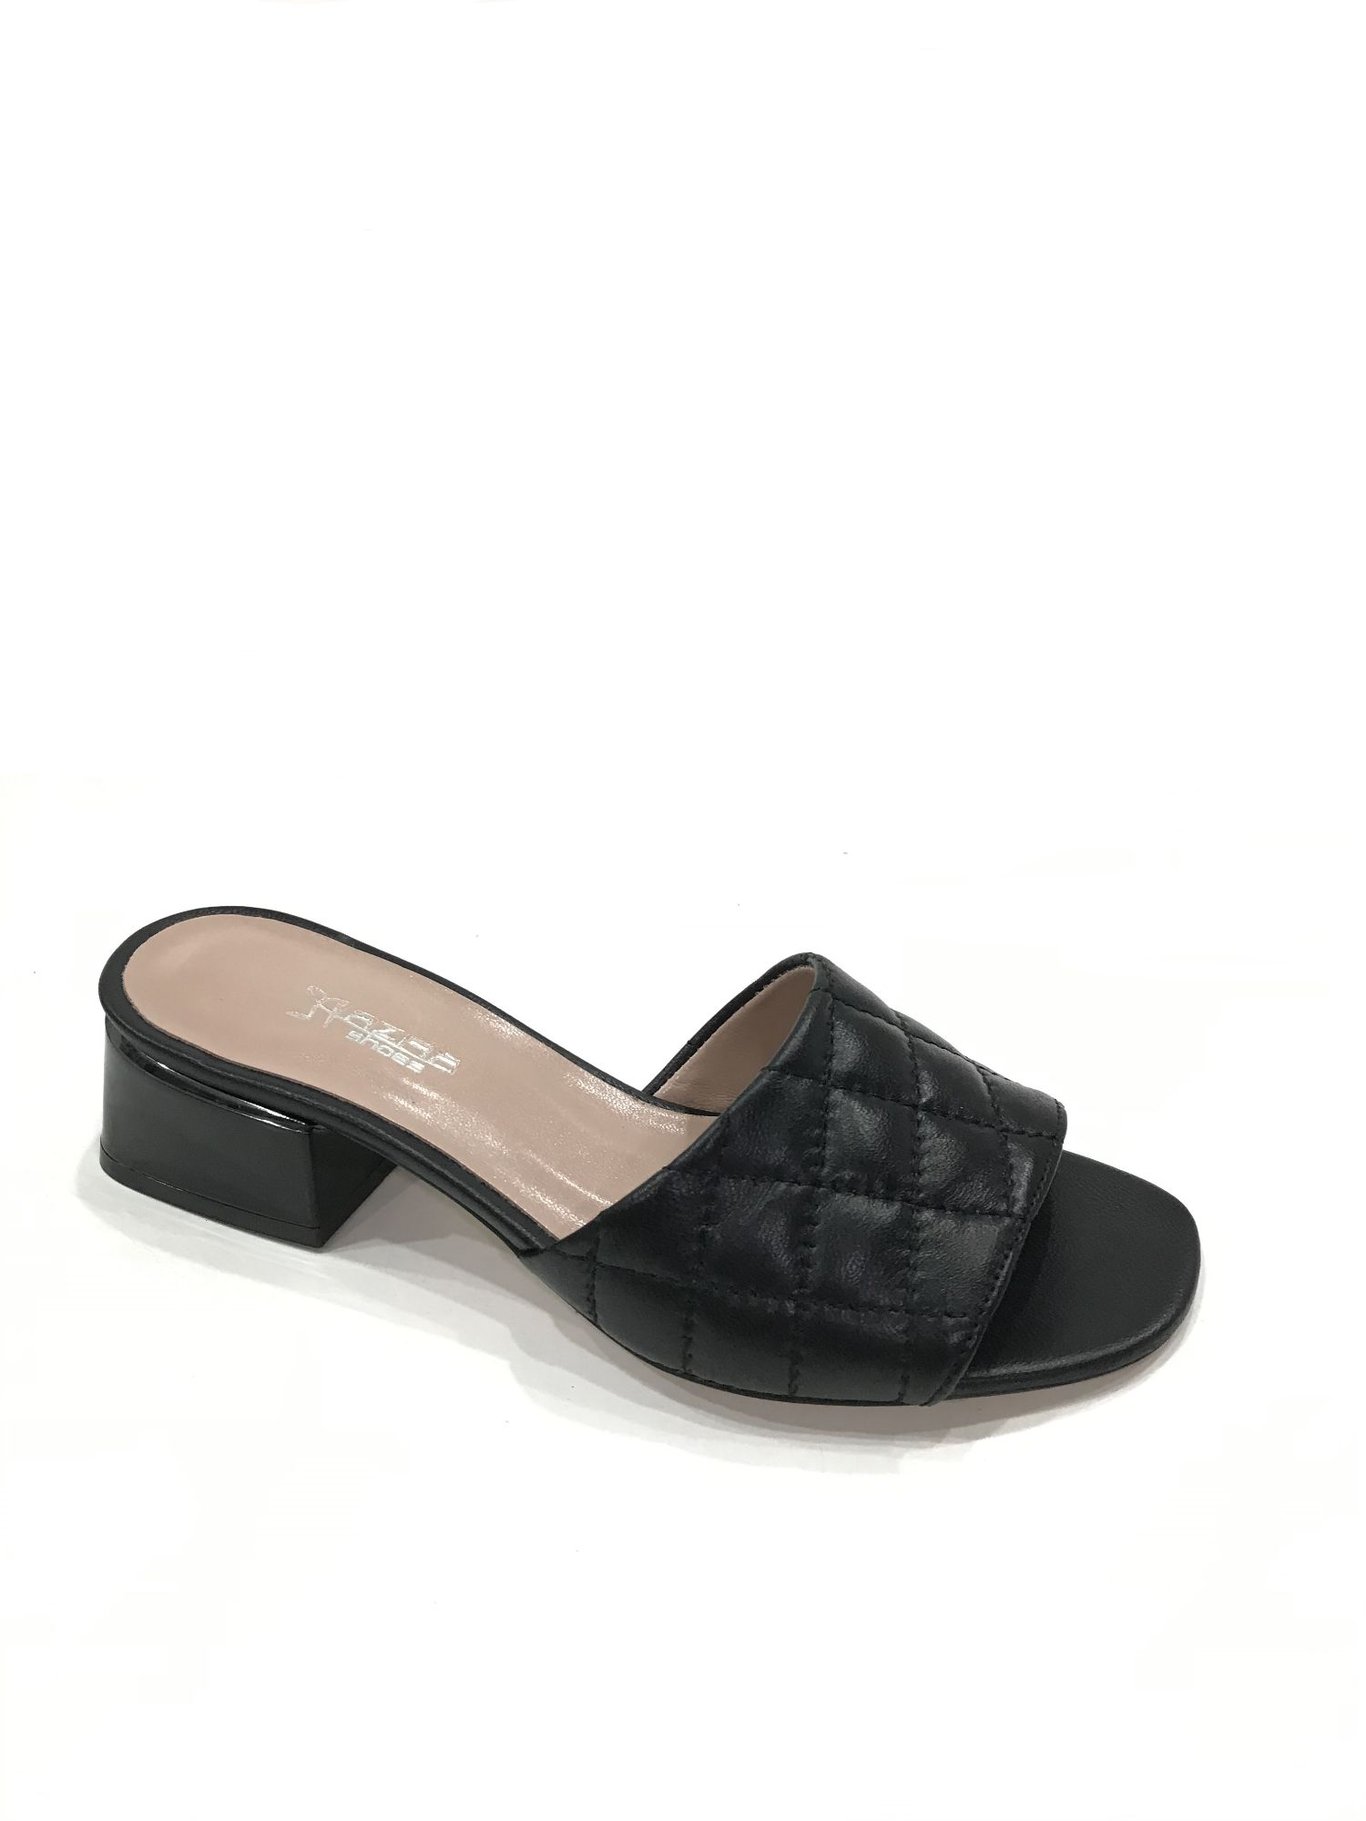 black color leather slippers